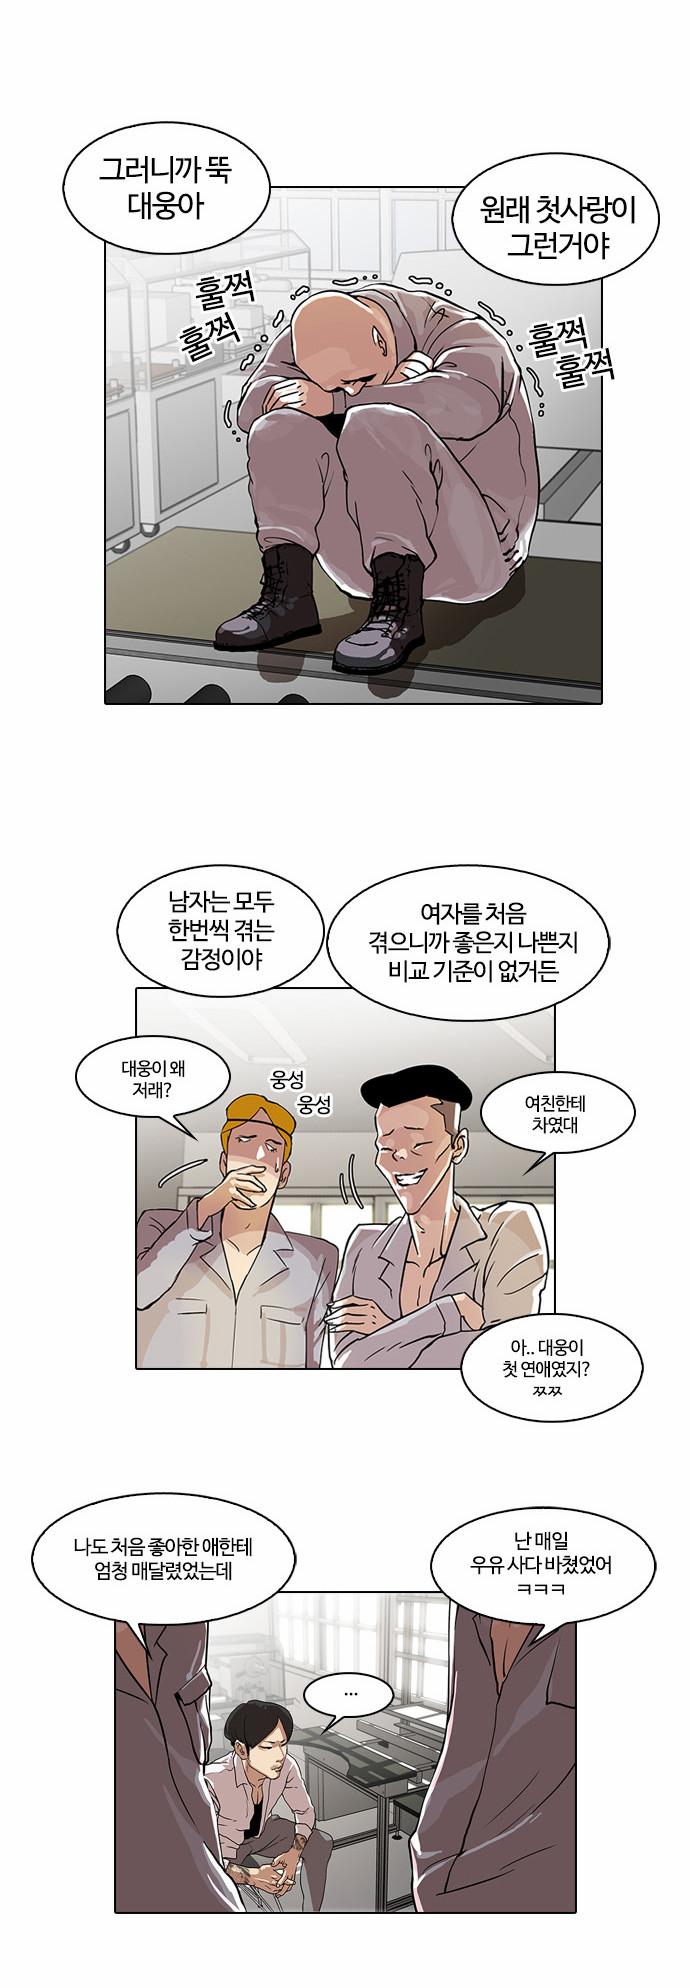 Lookism - Chapter 29 - Page 2